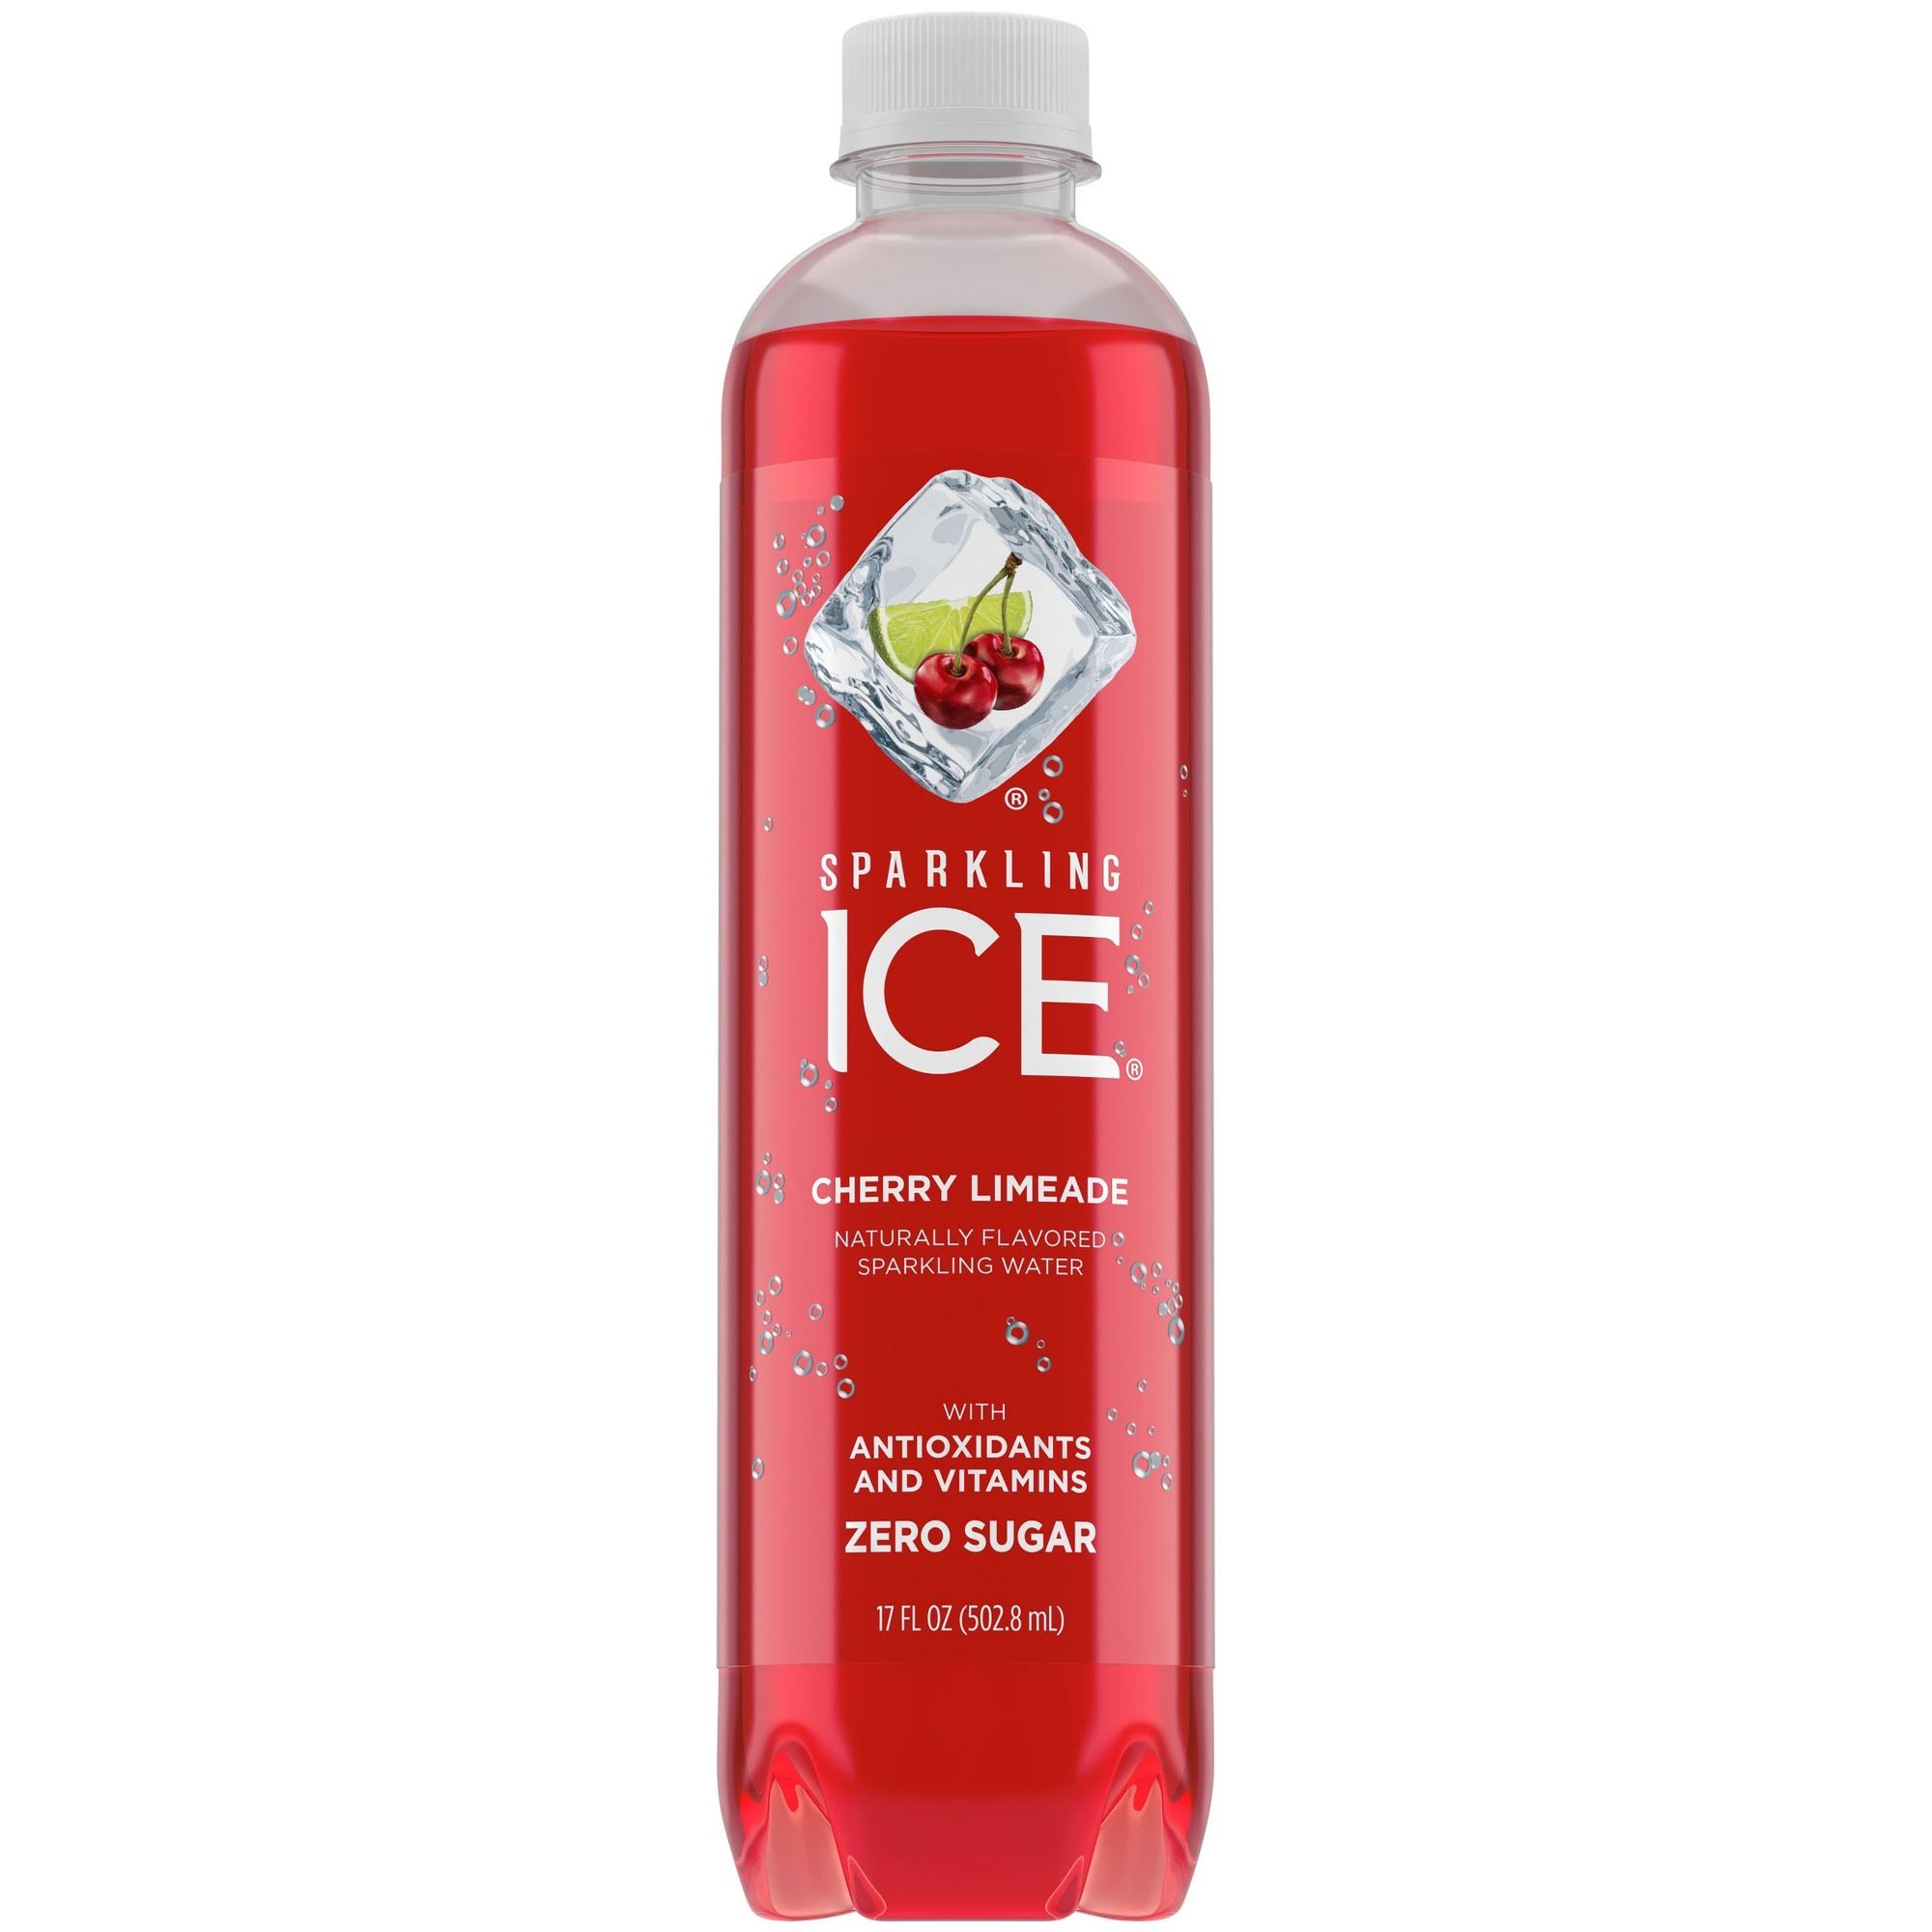 Sparkling Ice Sparkling Mountain Spring Water - Cherry Limeade, 17oz